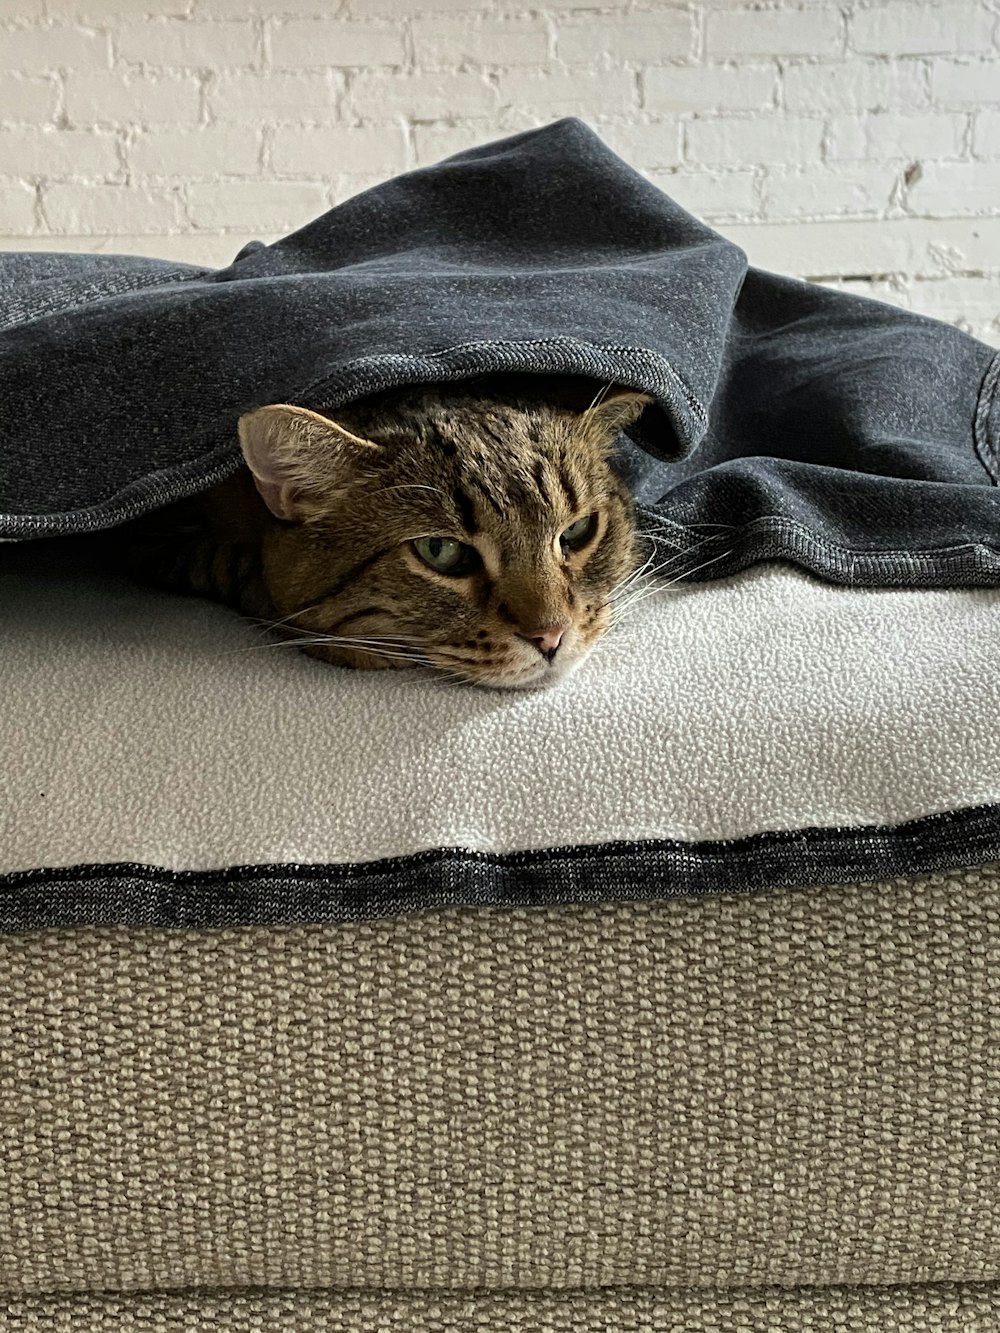 brown tabby cat on gray textile